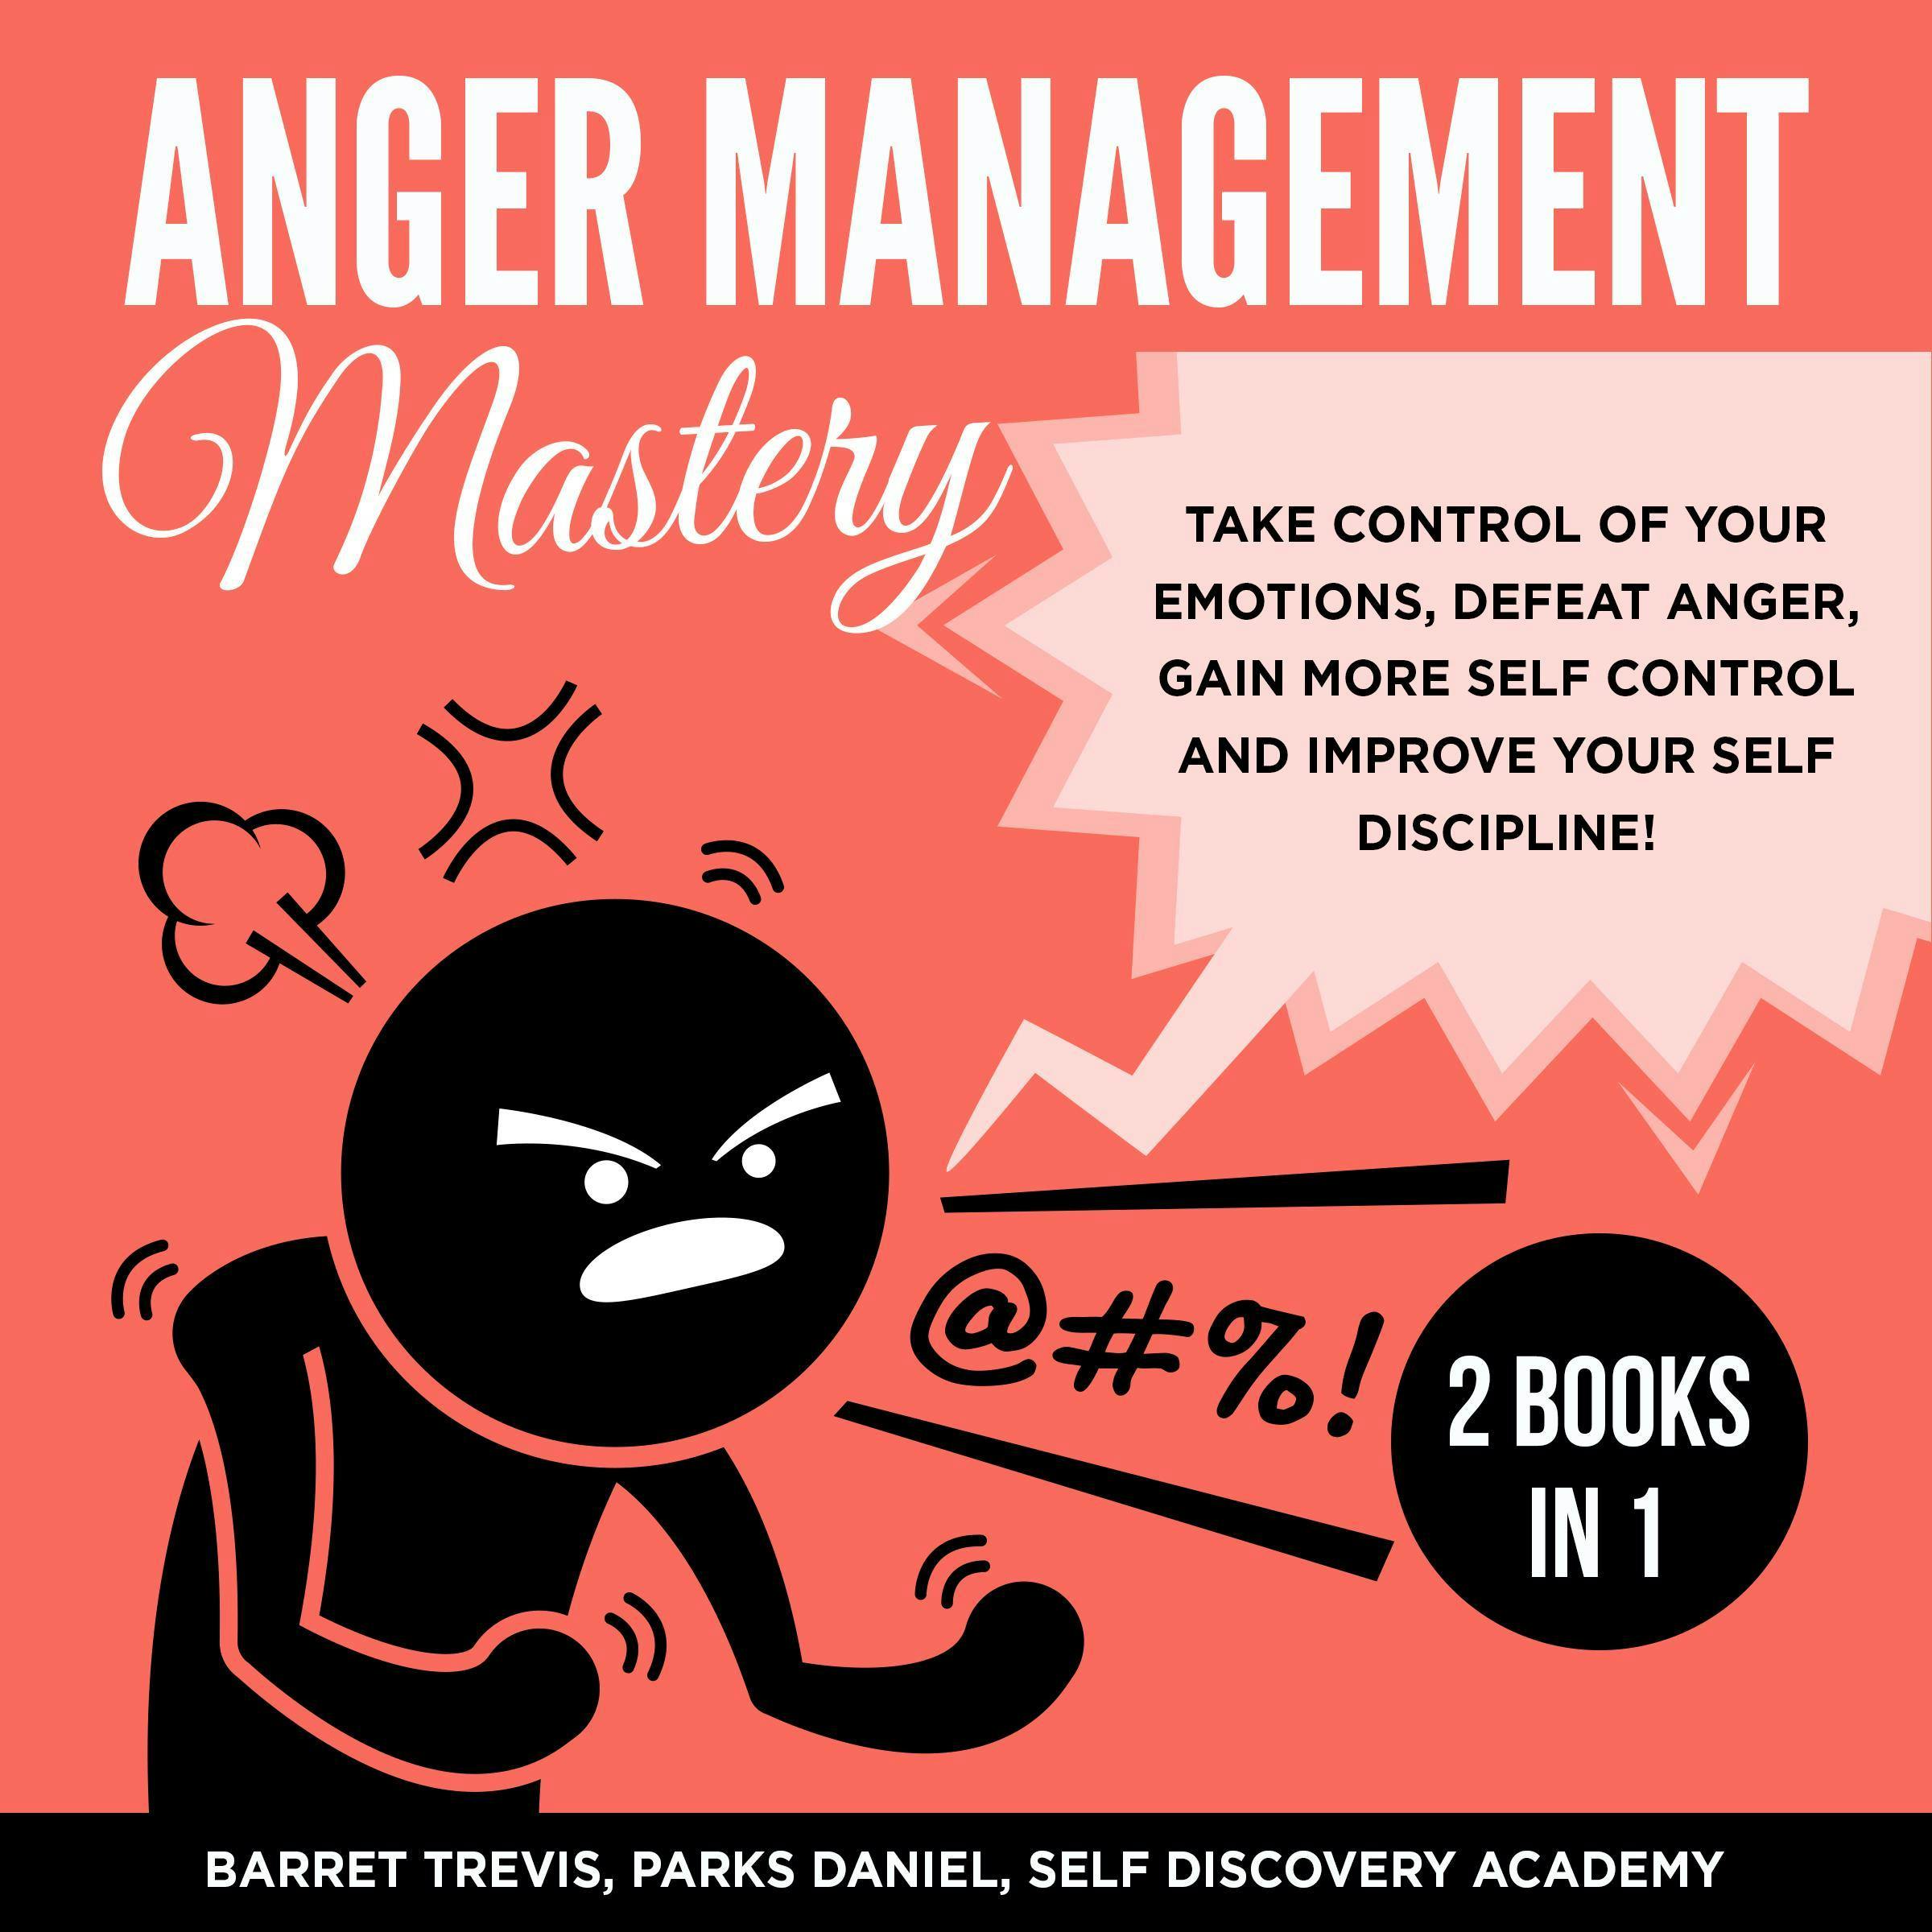 Anger Management Mastery: Take Control of Your Emotions, Defeat Anger, Gain More Self Control And Improve Your Self Discipline!, 2 Books in 1 - Self Discovery Academy, Parks Daniel, Barret Trevis